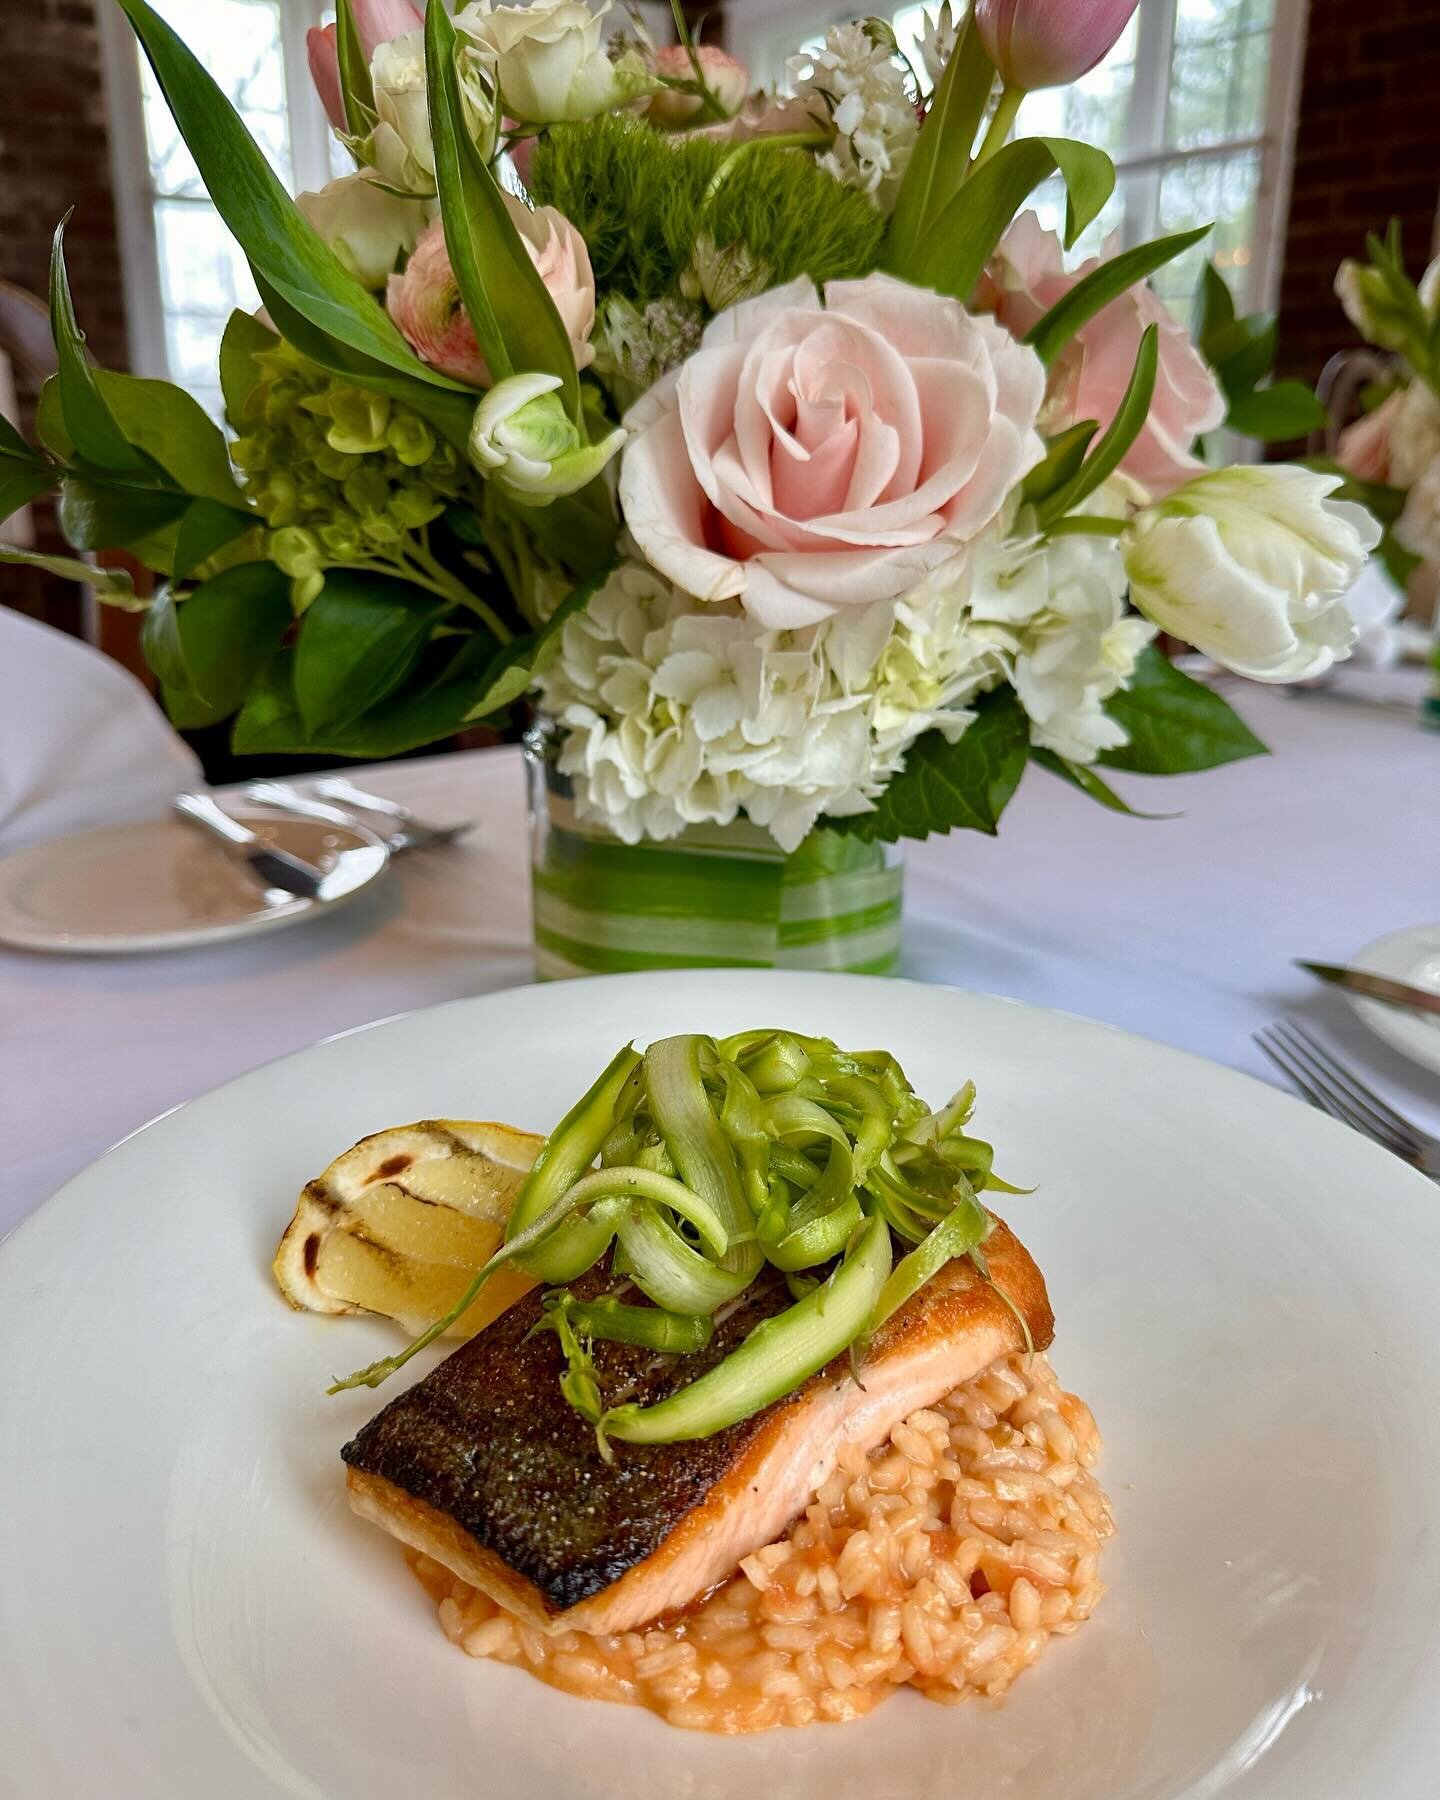 Weekend feature: Scottish Salmon. Pan seared, tender and slightly crisped, nestled on smoked tomato risotto, topped with shaved asparagus salad with citrus vinaigrette, charred fresh lemon. We&rsquo;re excited to share this with you!

#lovelansing #l